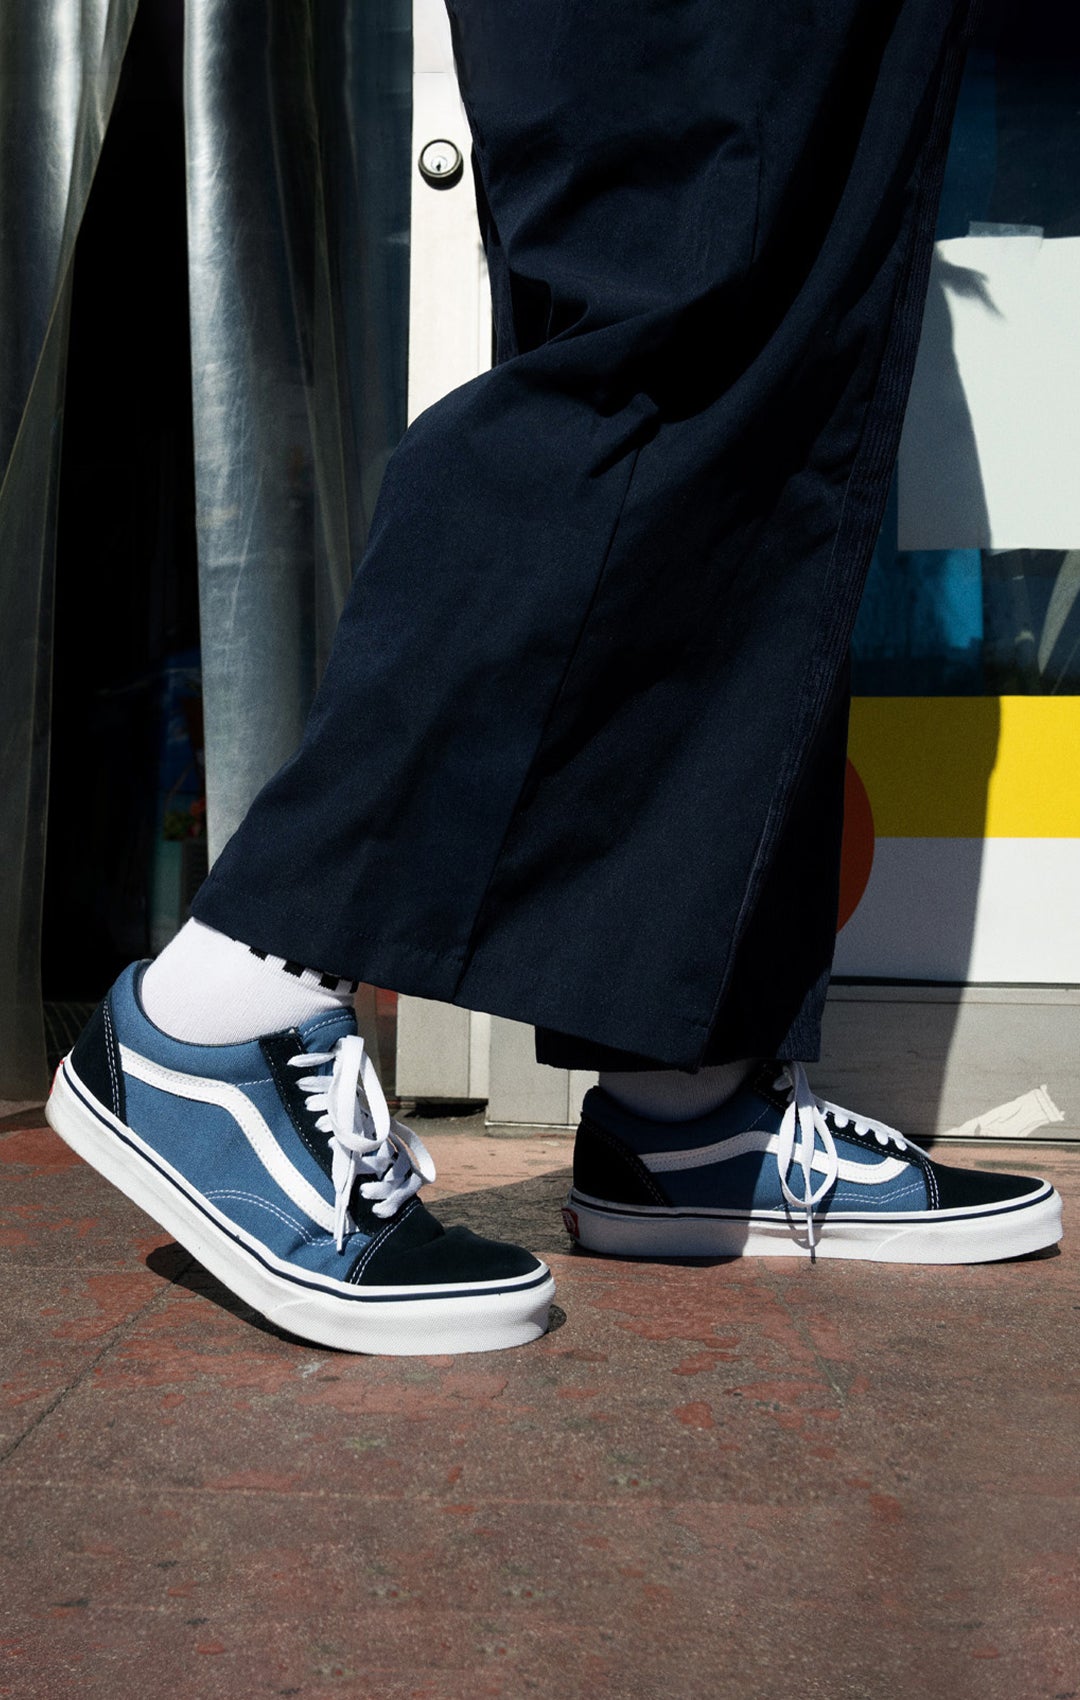 Vans Shoes & Clothing | Champs Sports